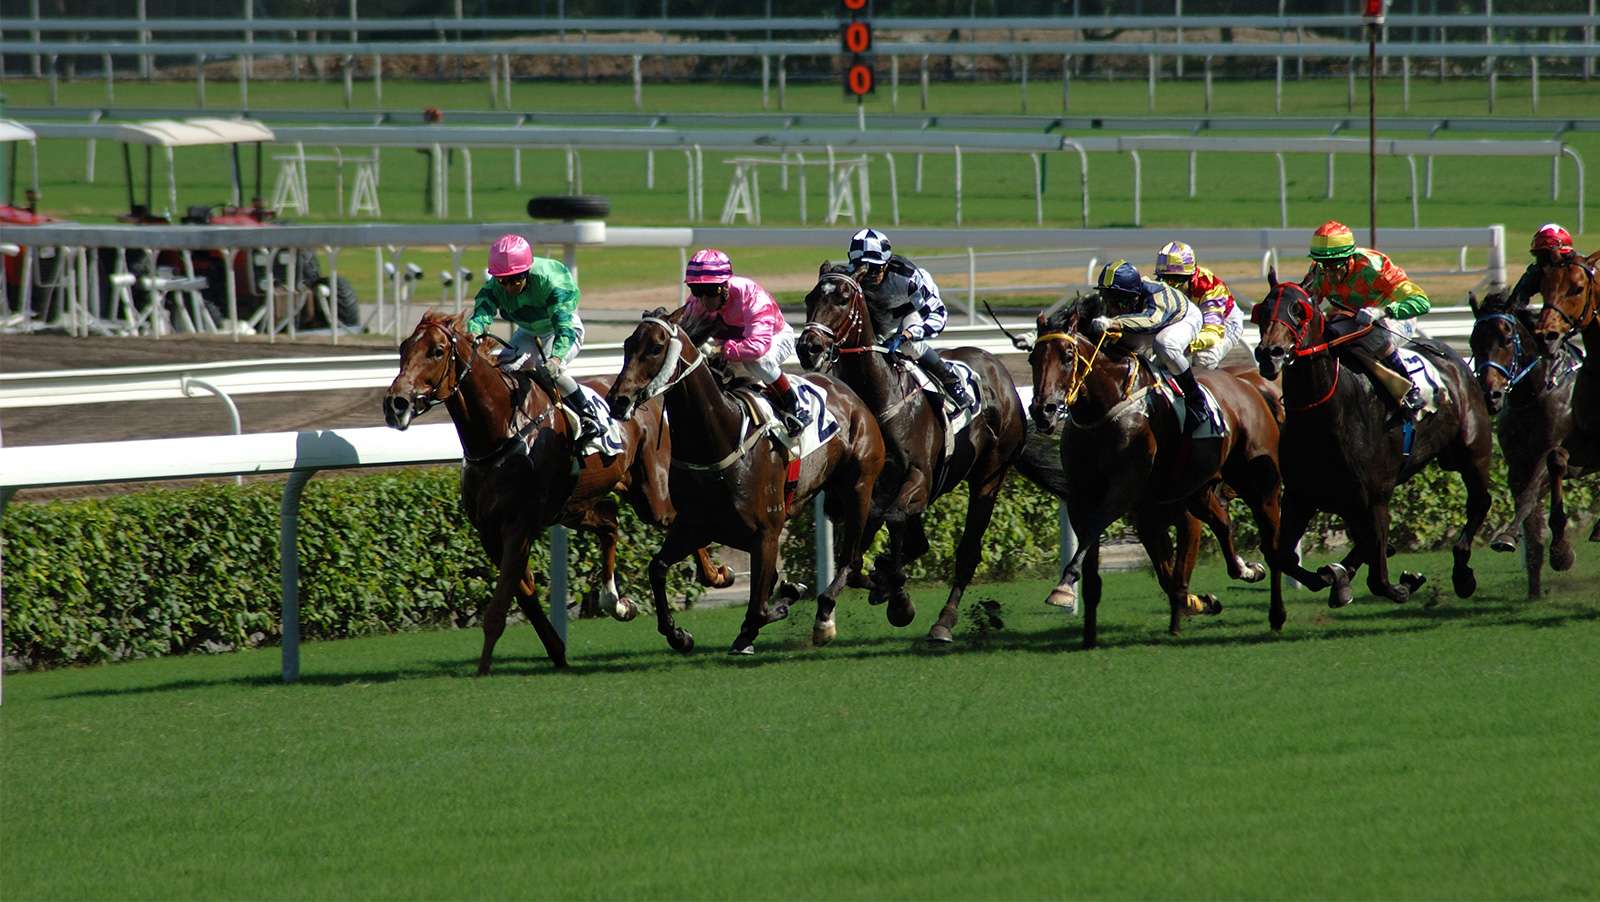 India's RummyCircle to launch gambling site for horse races